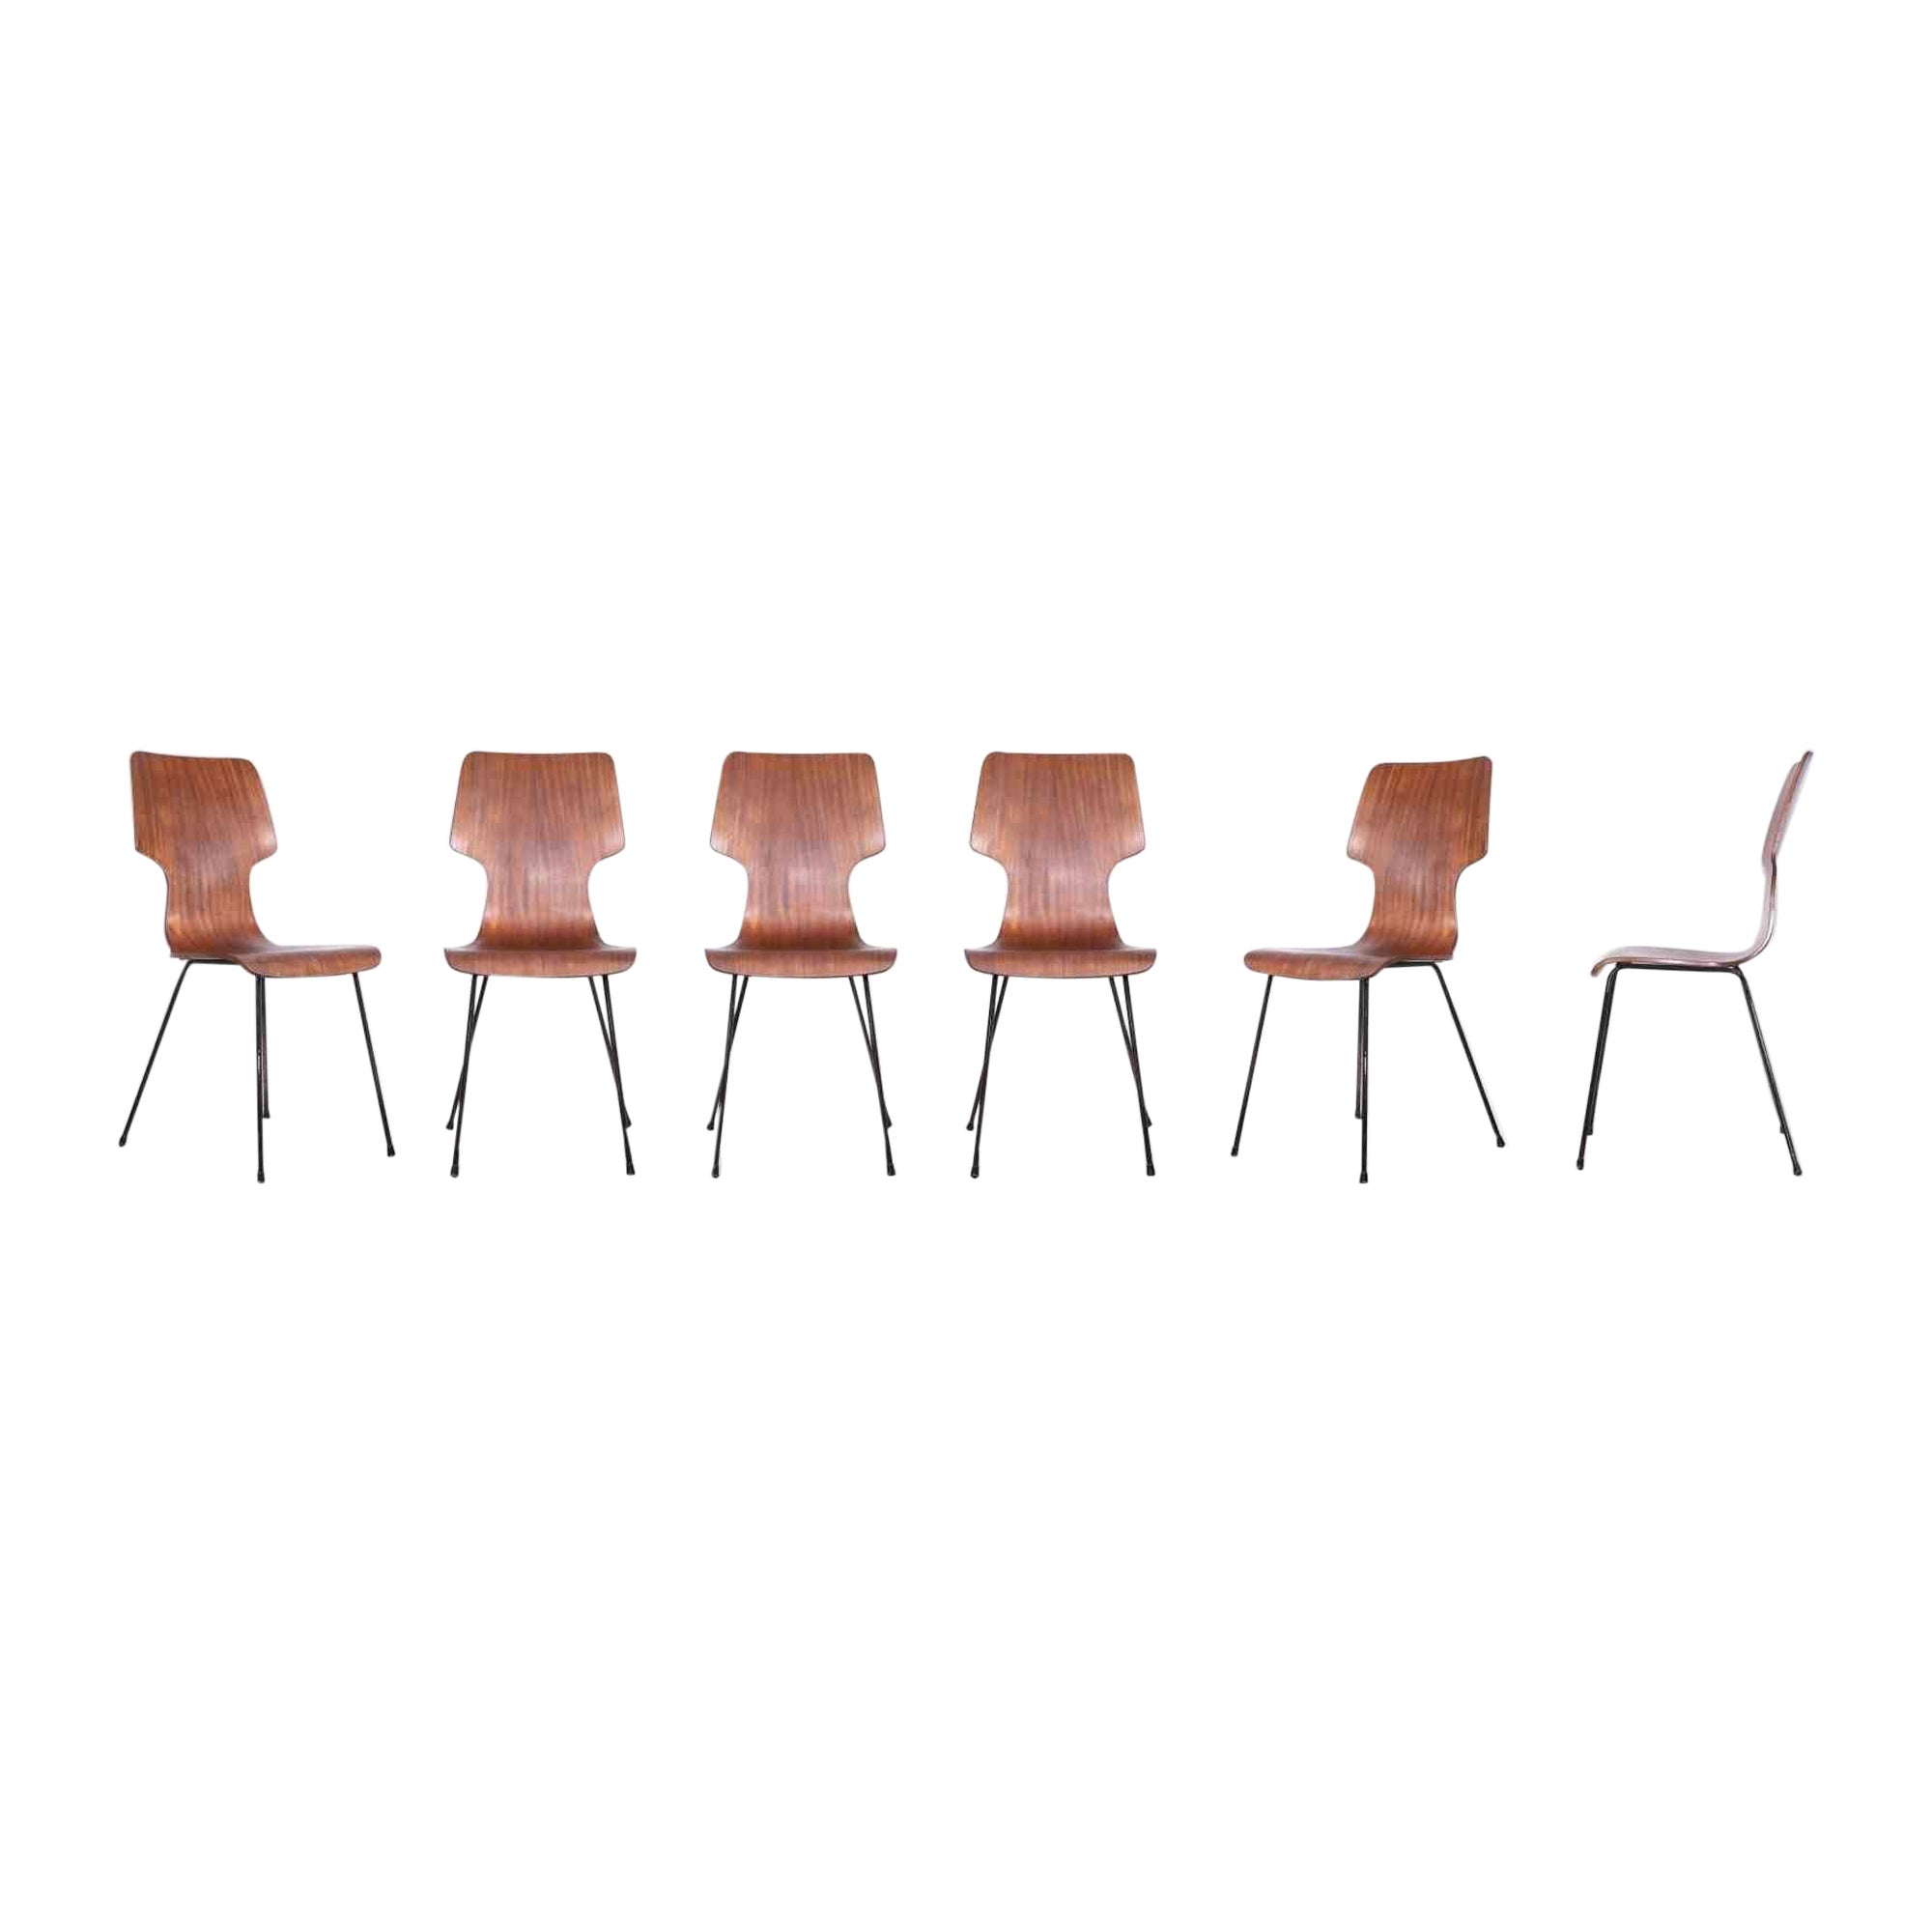 Set of 6 Vintage Chairs by Carlo Ratti, 1950s